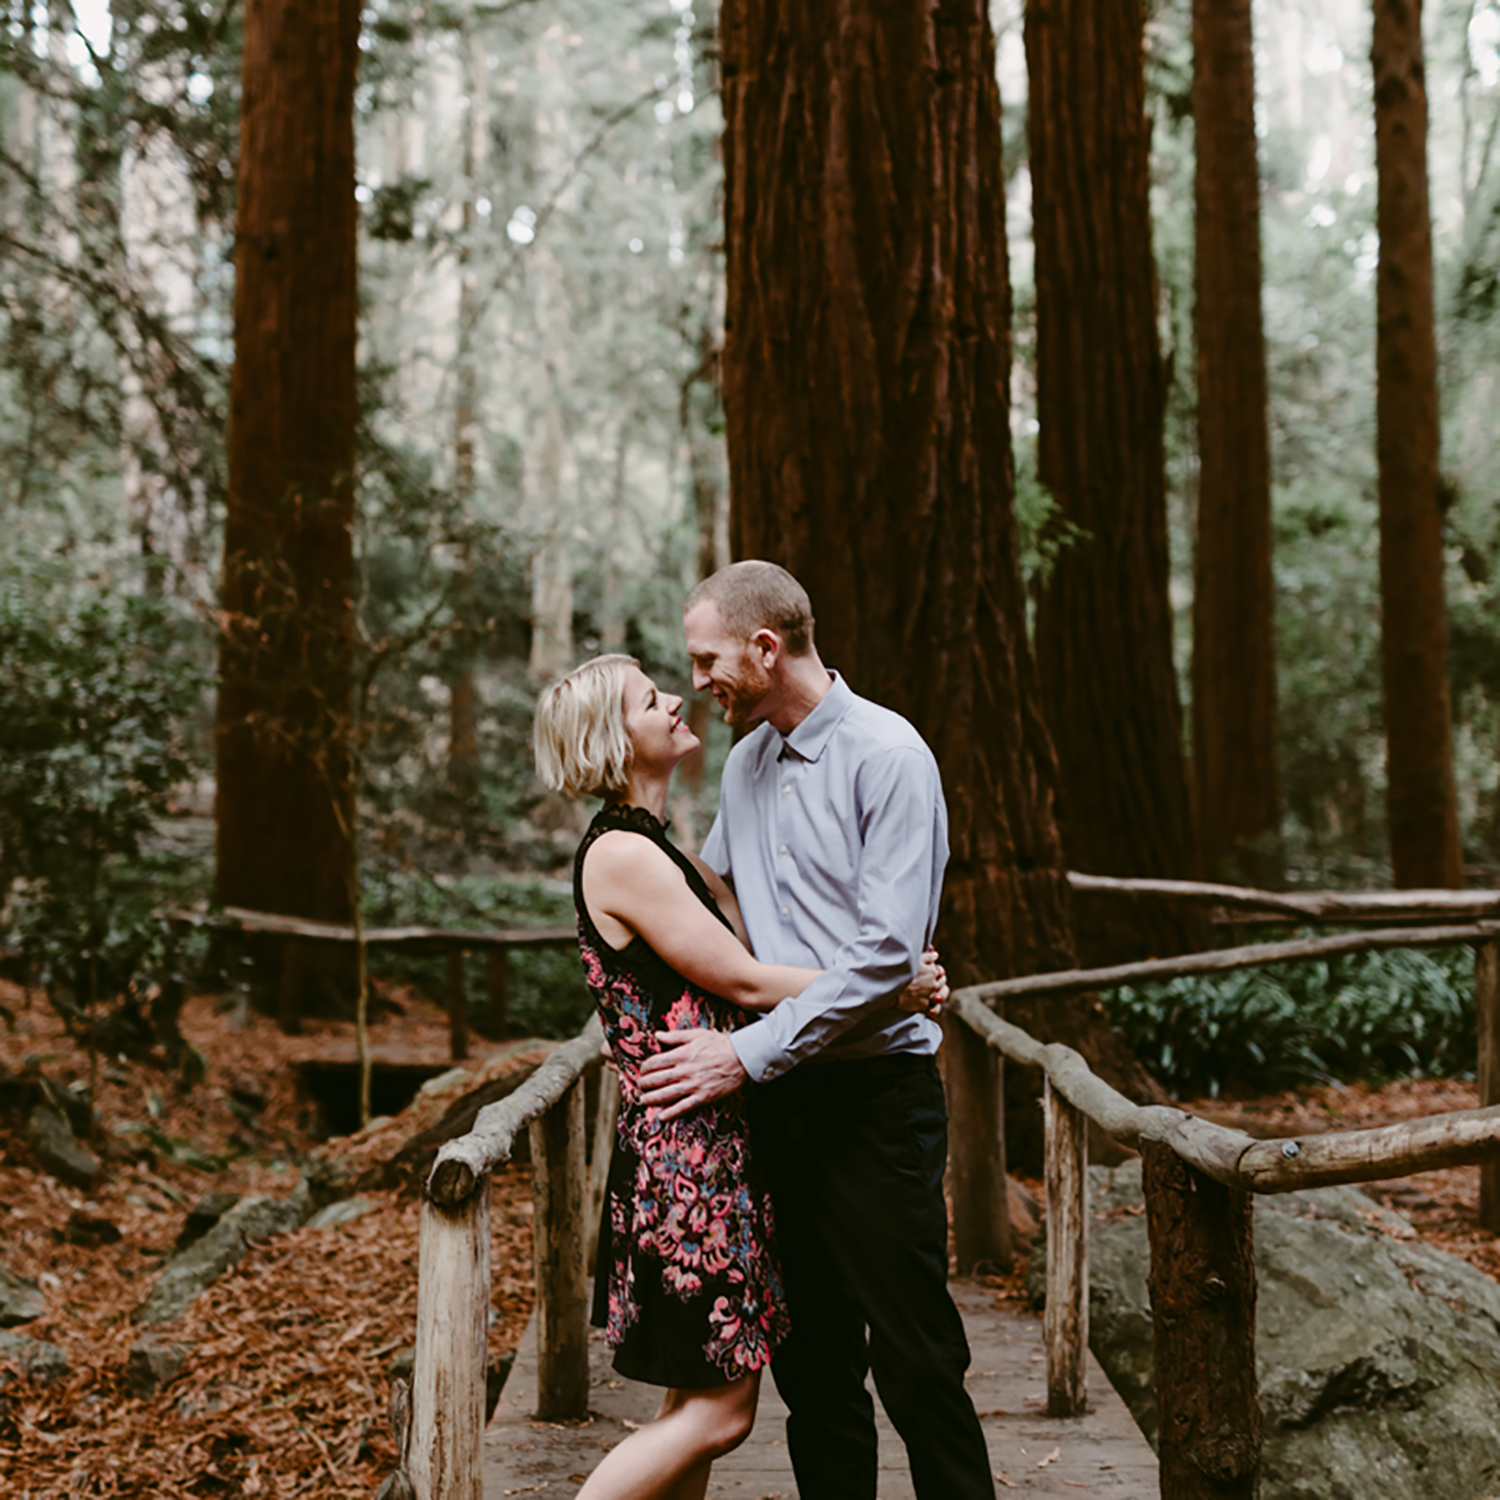  Engagement Photography using natural light in a moody forest. Walnut Creek, CA. 